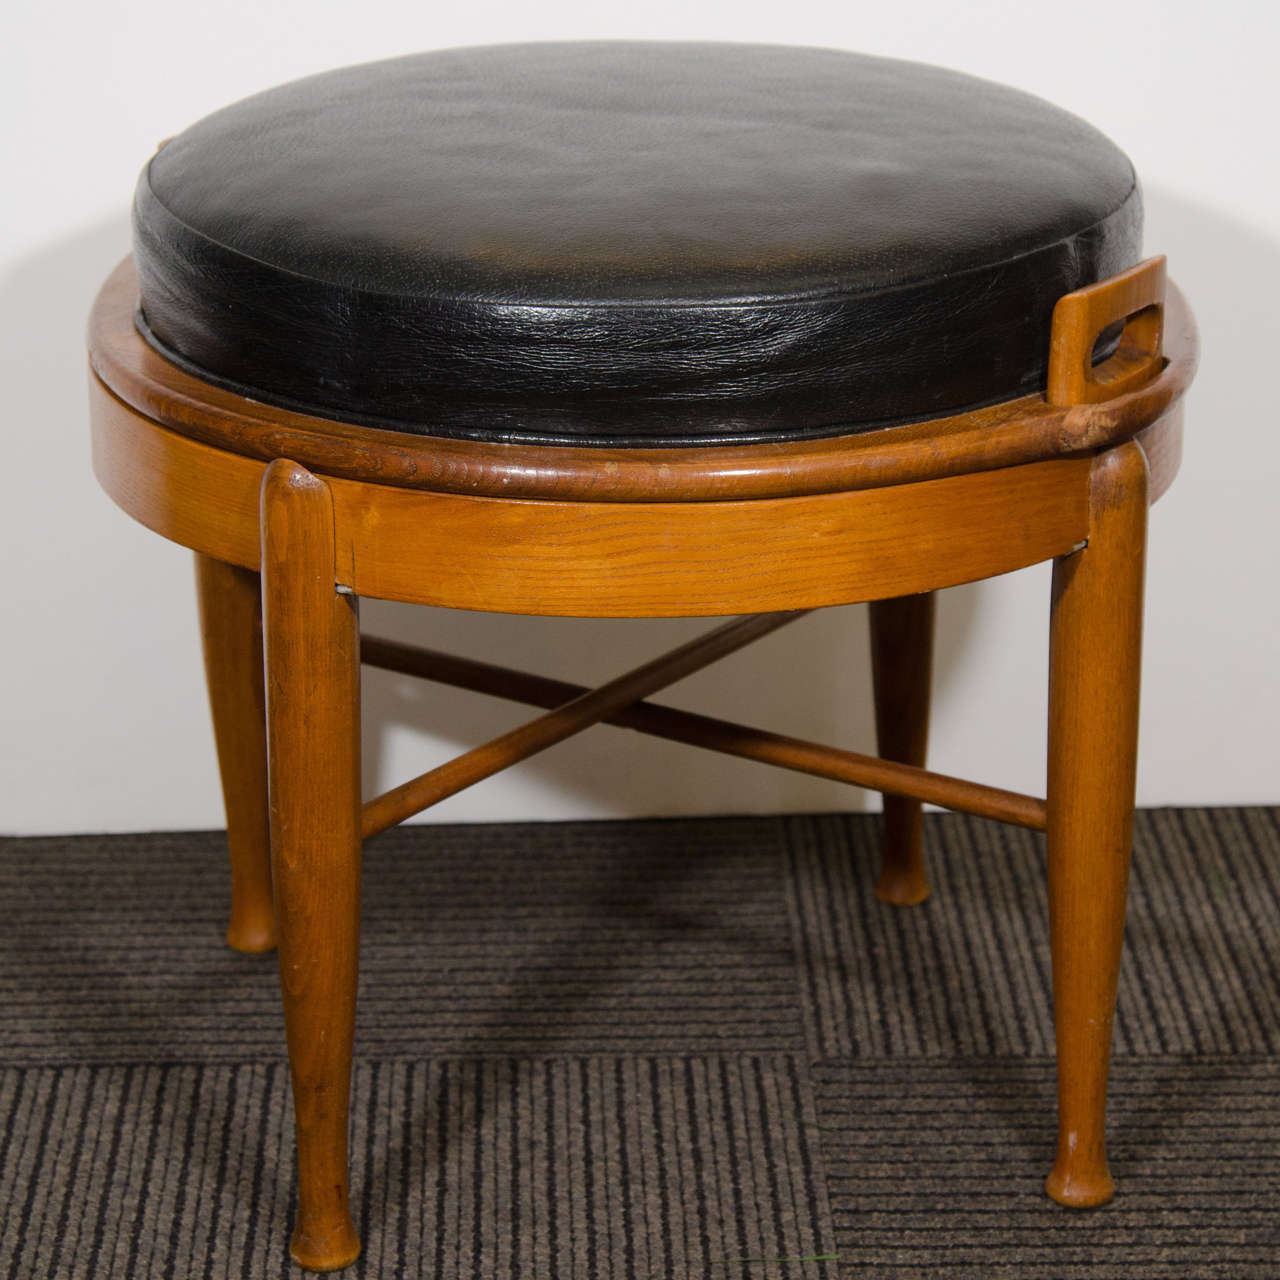 A vintage two-part teak stool with black leather cushion that converts to a side or occasional table by BJ Hansen for Mobler.

Good vintage condition with age appropriate wear.